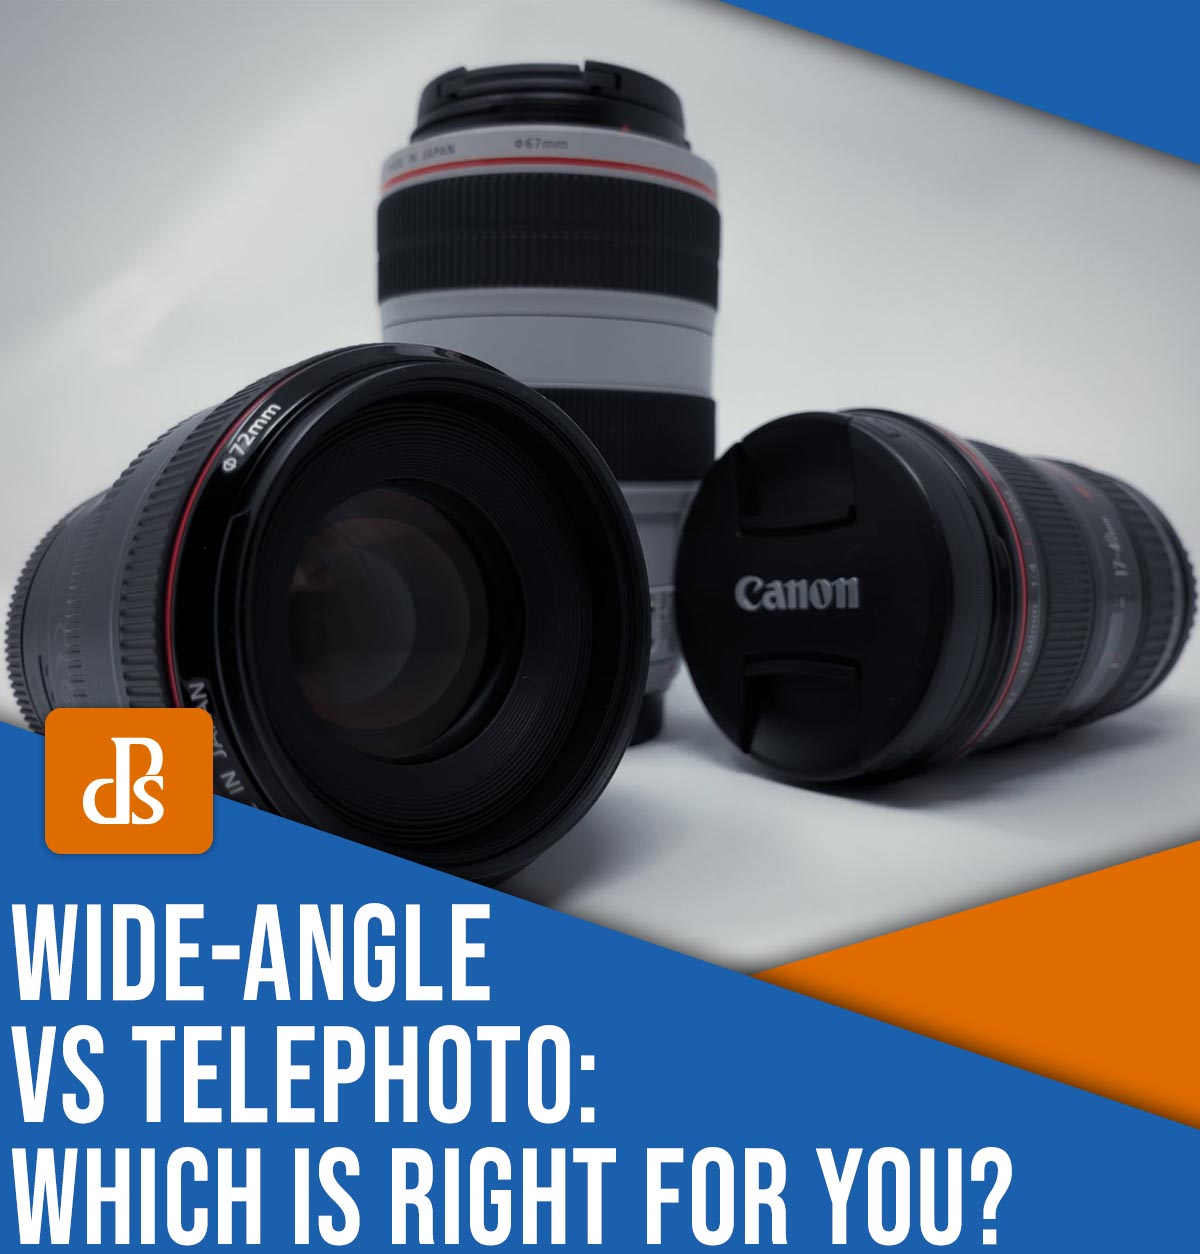 Wide-angle vs telephoto lense: Which is right for you?